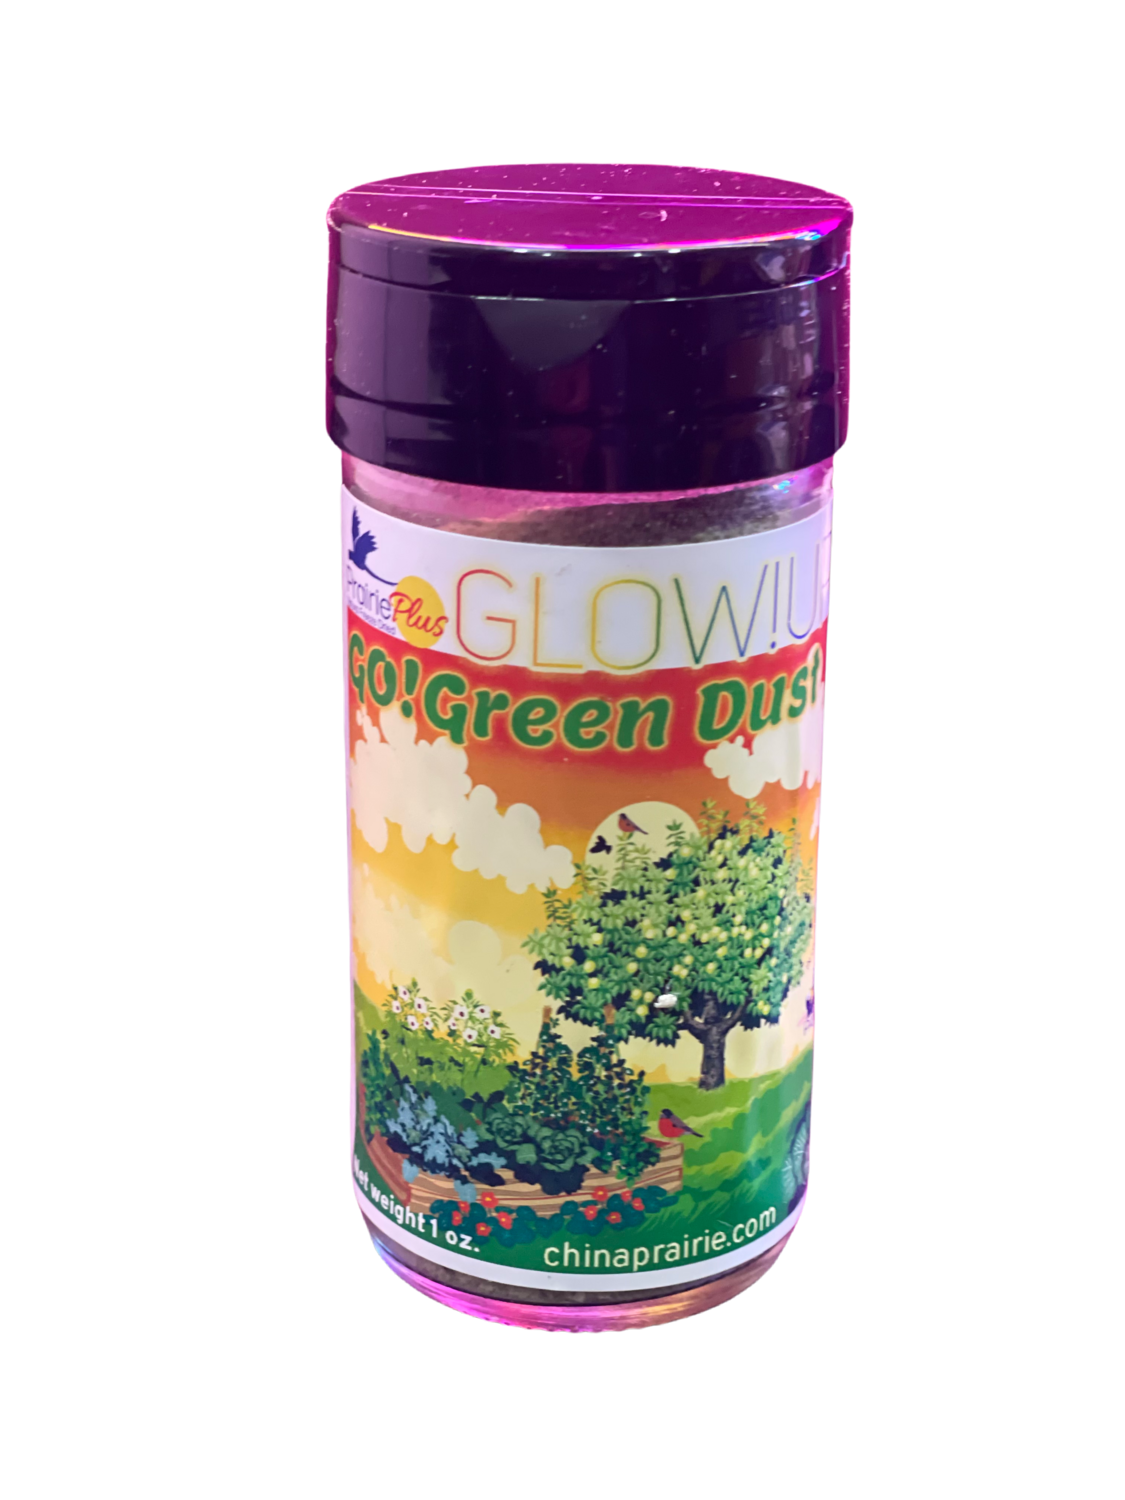 Glow!Up Go! Green Dust Whole Food Supplement 1 oz. Shaker - Freeze Dried Broccoli, Okra, Green Beans, Granny Smith Apple, Collard Greens, Peppermint Leaf, Insect Package